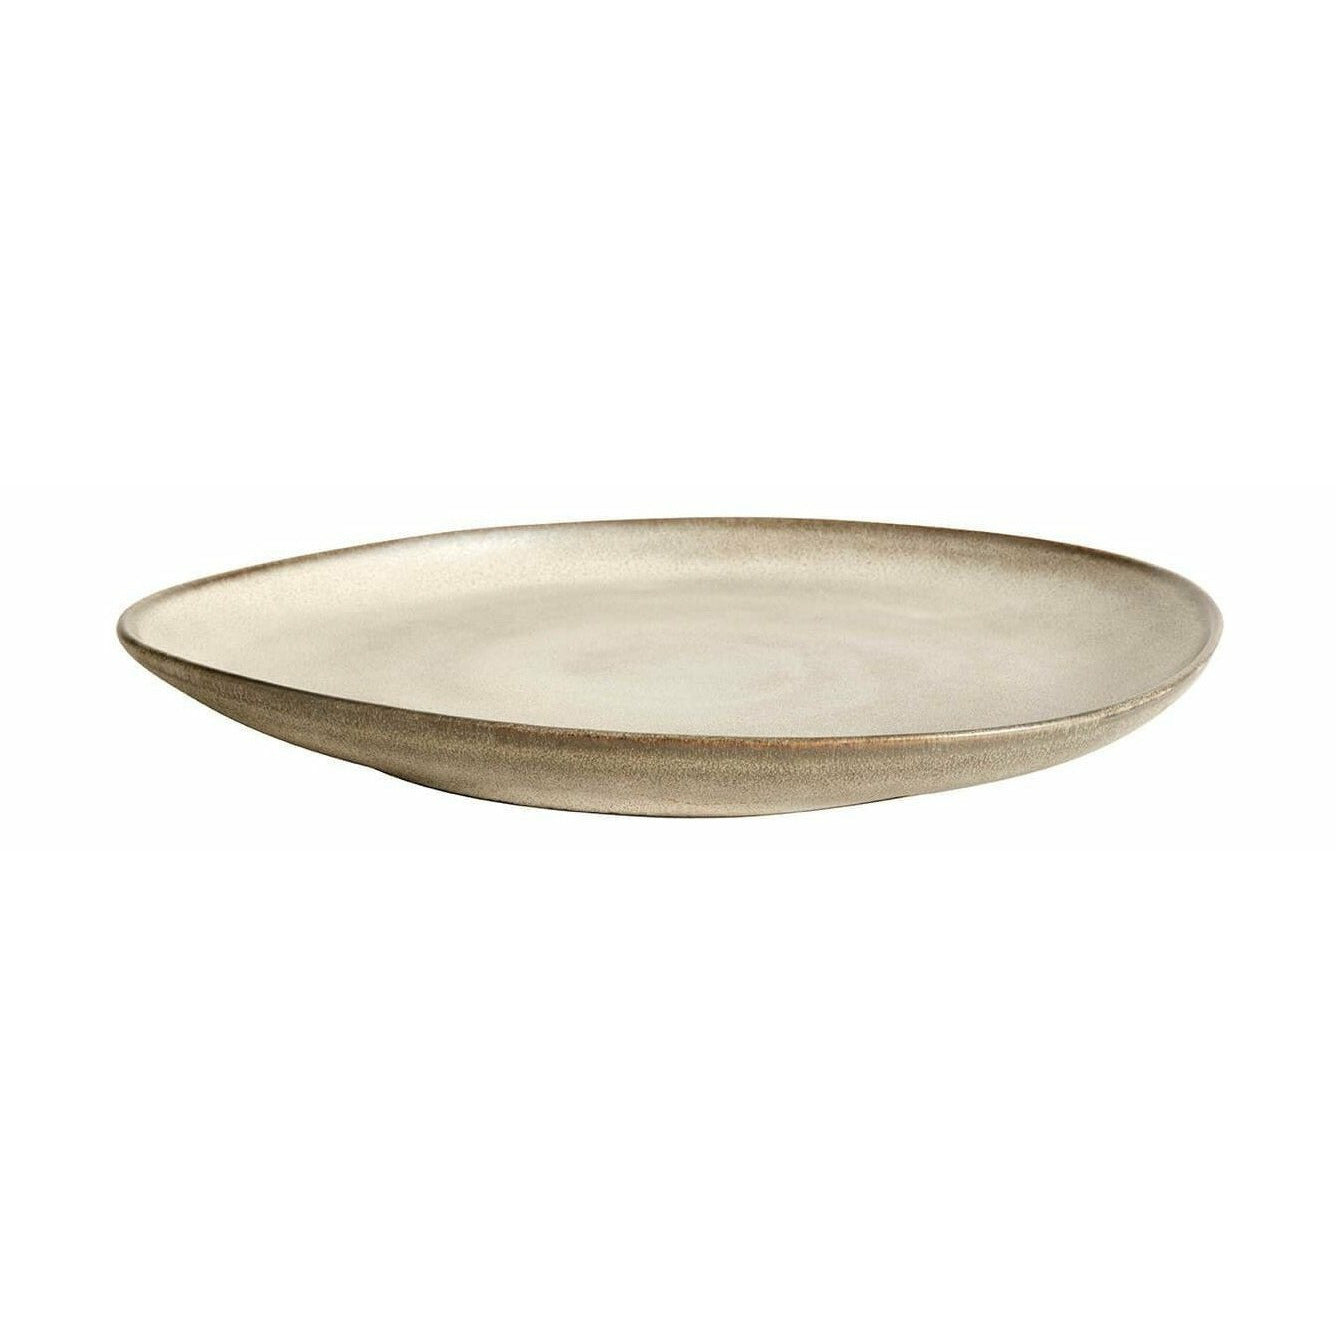 Muubs Mame Dinner Plate Oysters, 24 cm